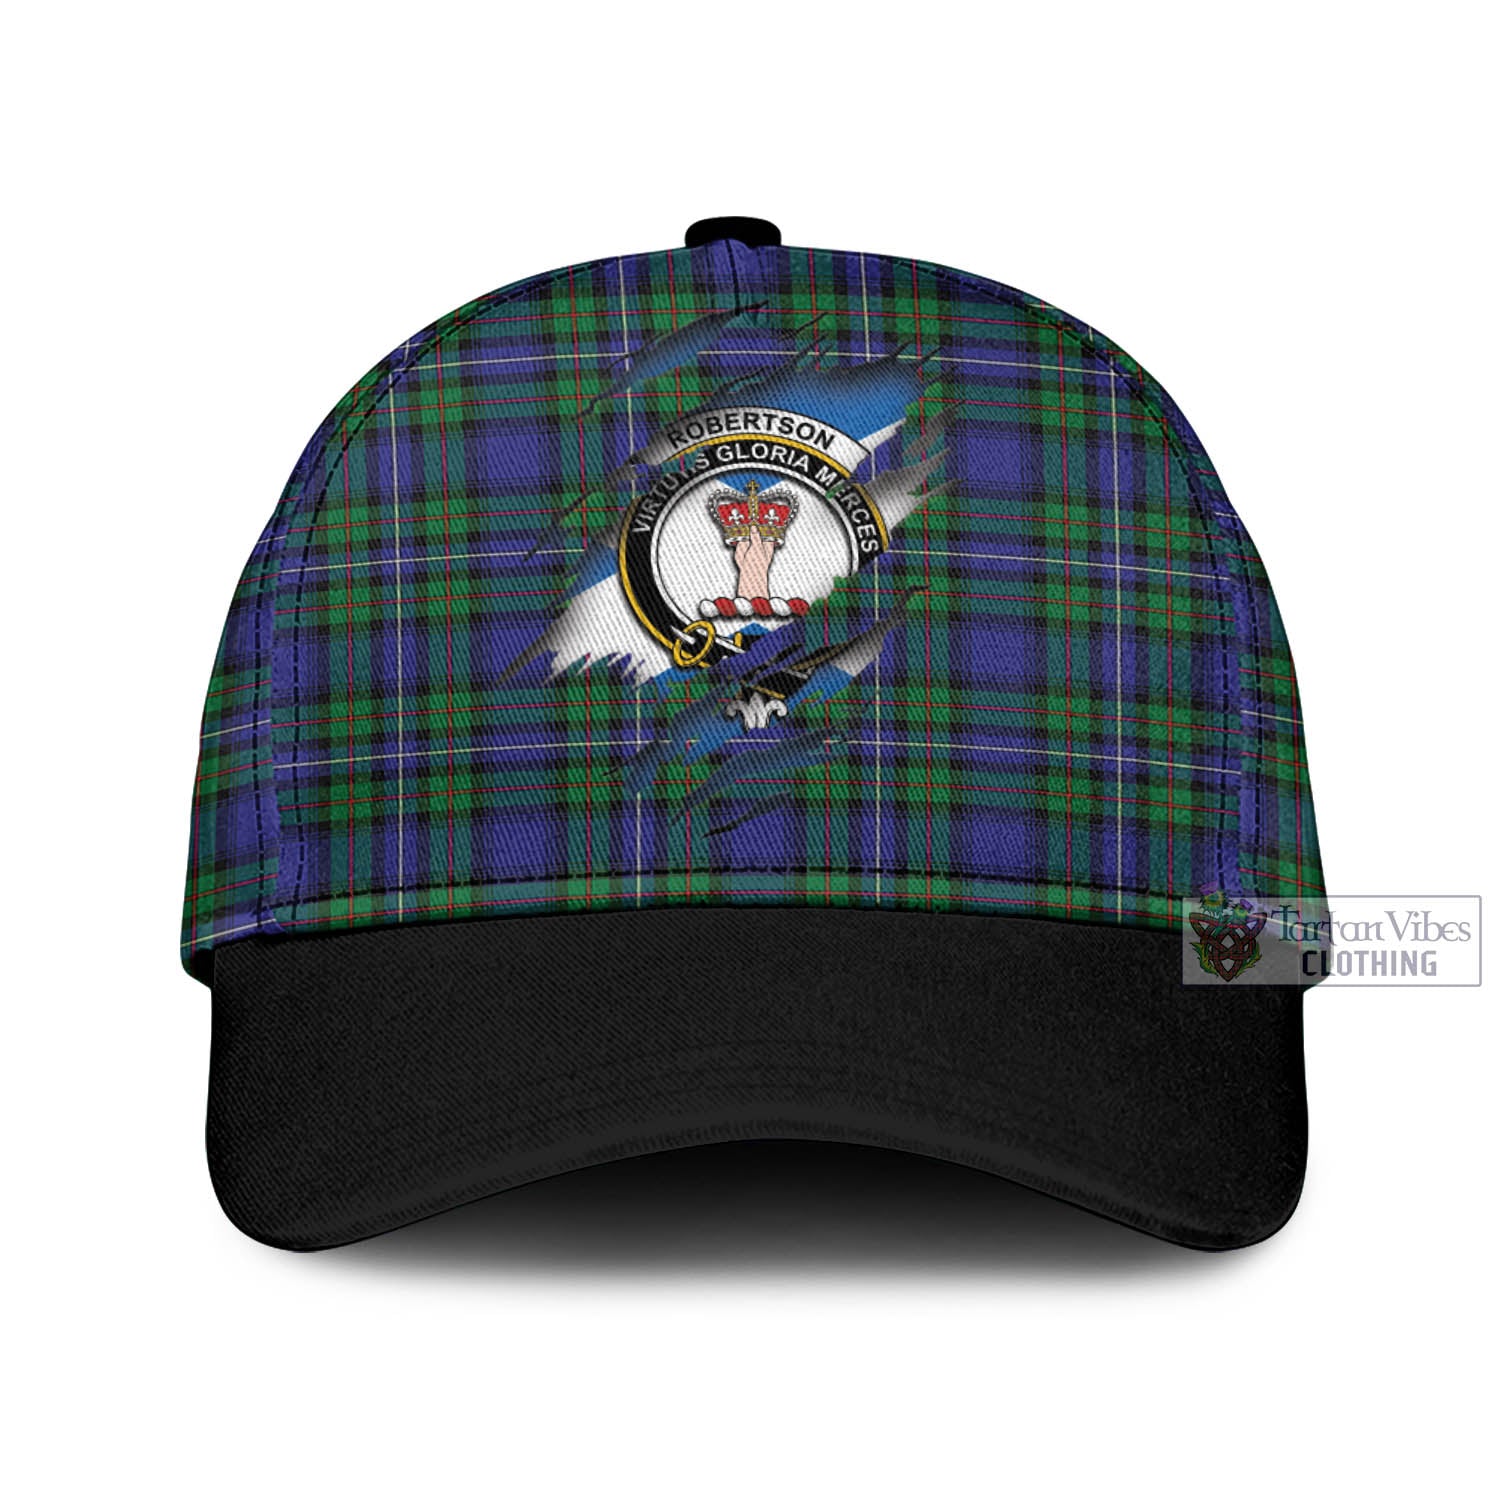 Tartan Vibes Clothing Robertson Hunting Modern Tartan Classic Cap with Family Crest In Me Style